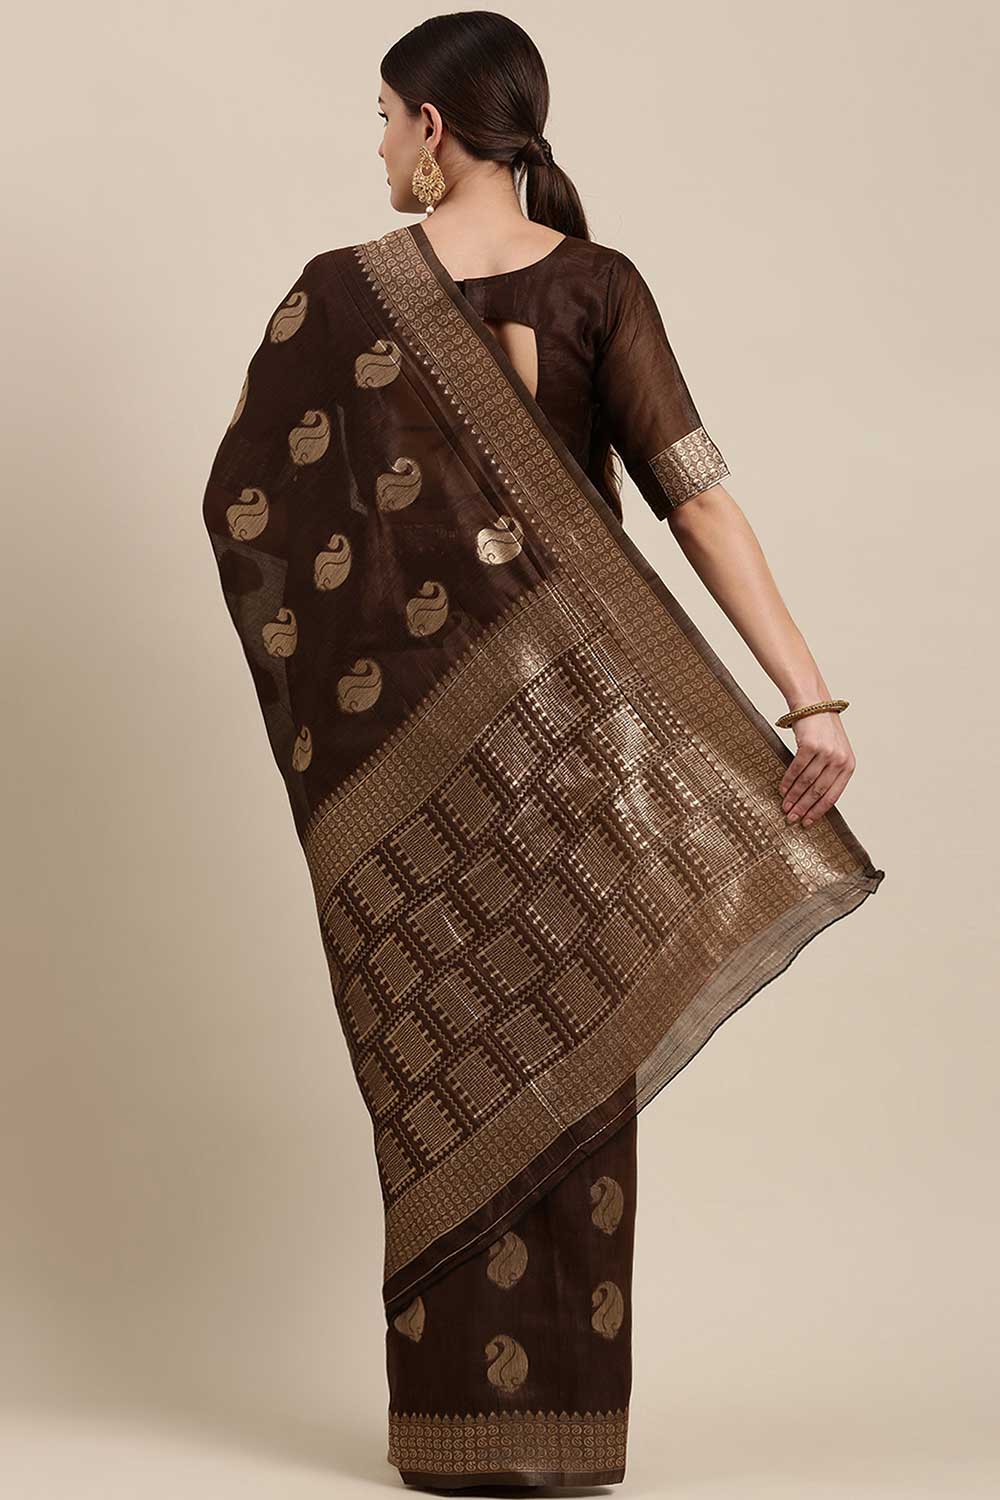 Shop Sheena Brown Bagh Blended Linen One Minute Saree at best offer at our  Store - One Minute Saree